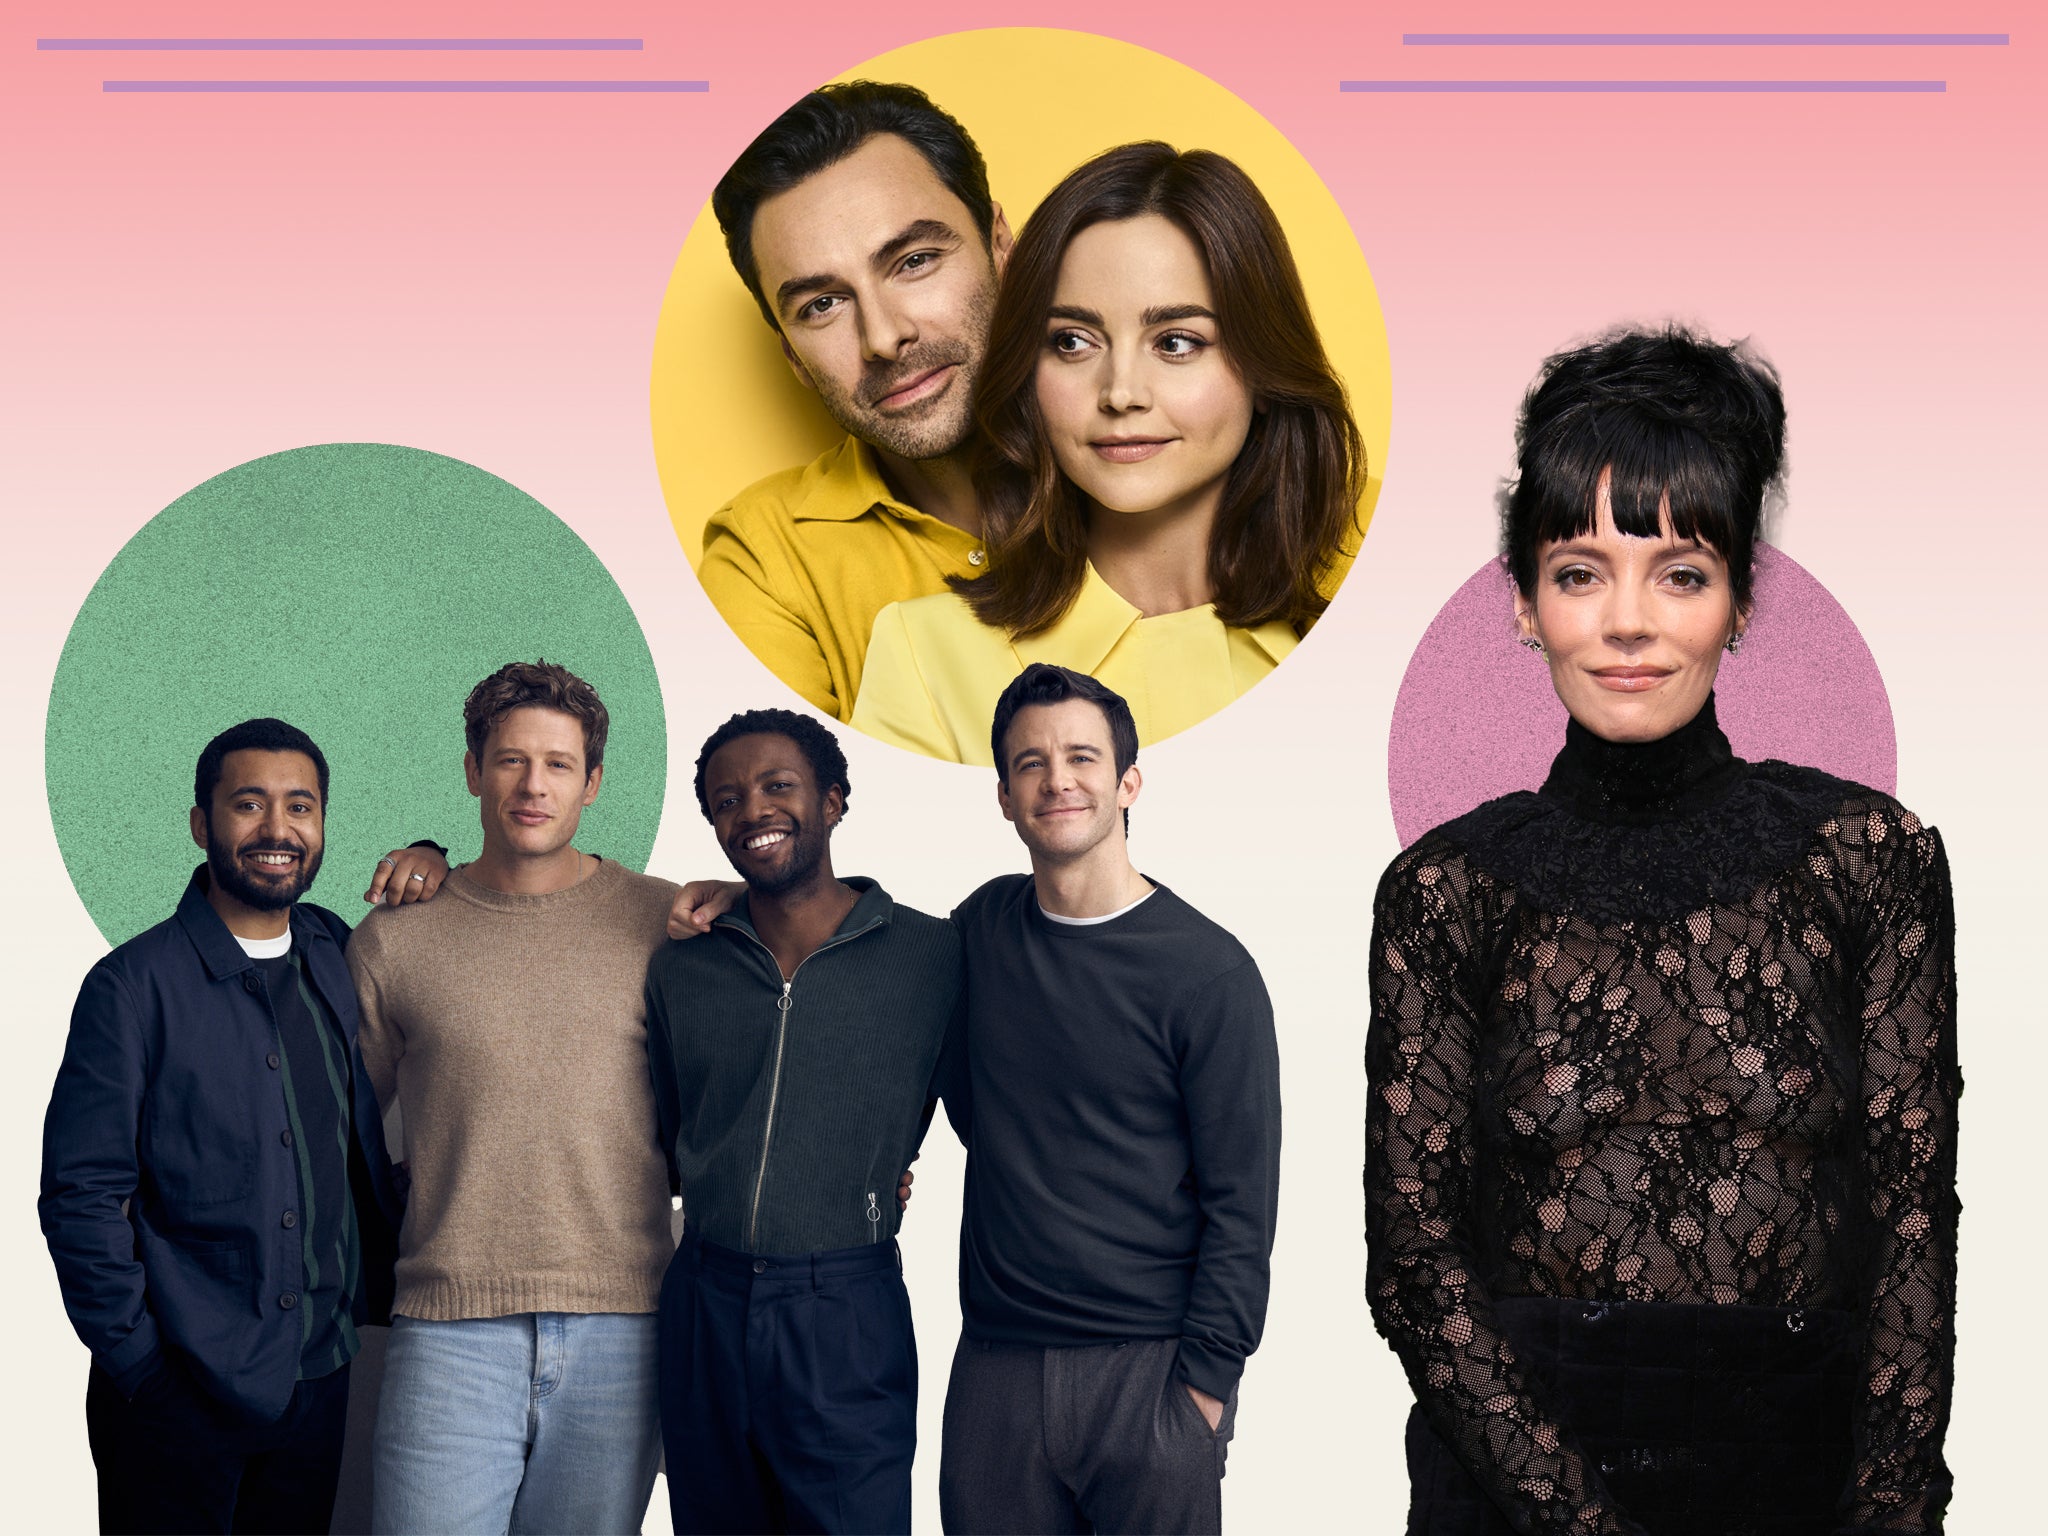 Clockwise from top: Jenna Coleman and Aidan Turner in ‘Lemons Lemons Lemons Lemons Lemons’, Lily Allen, and the cast of ‘A Little Life’